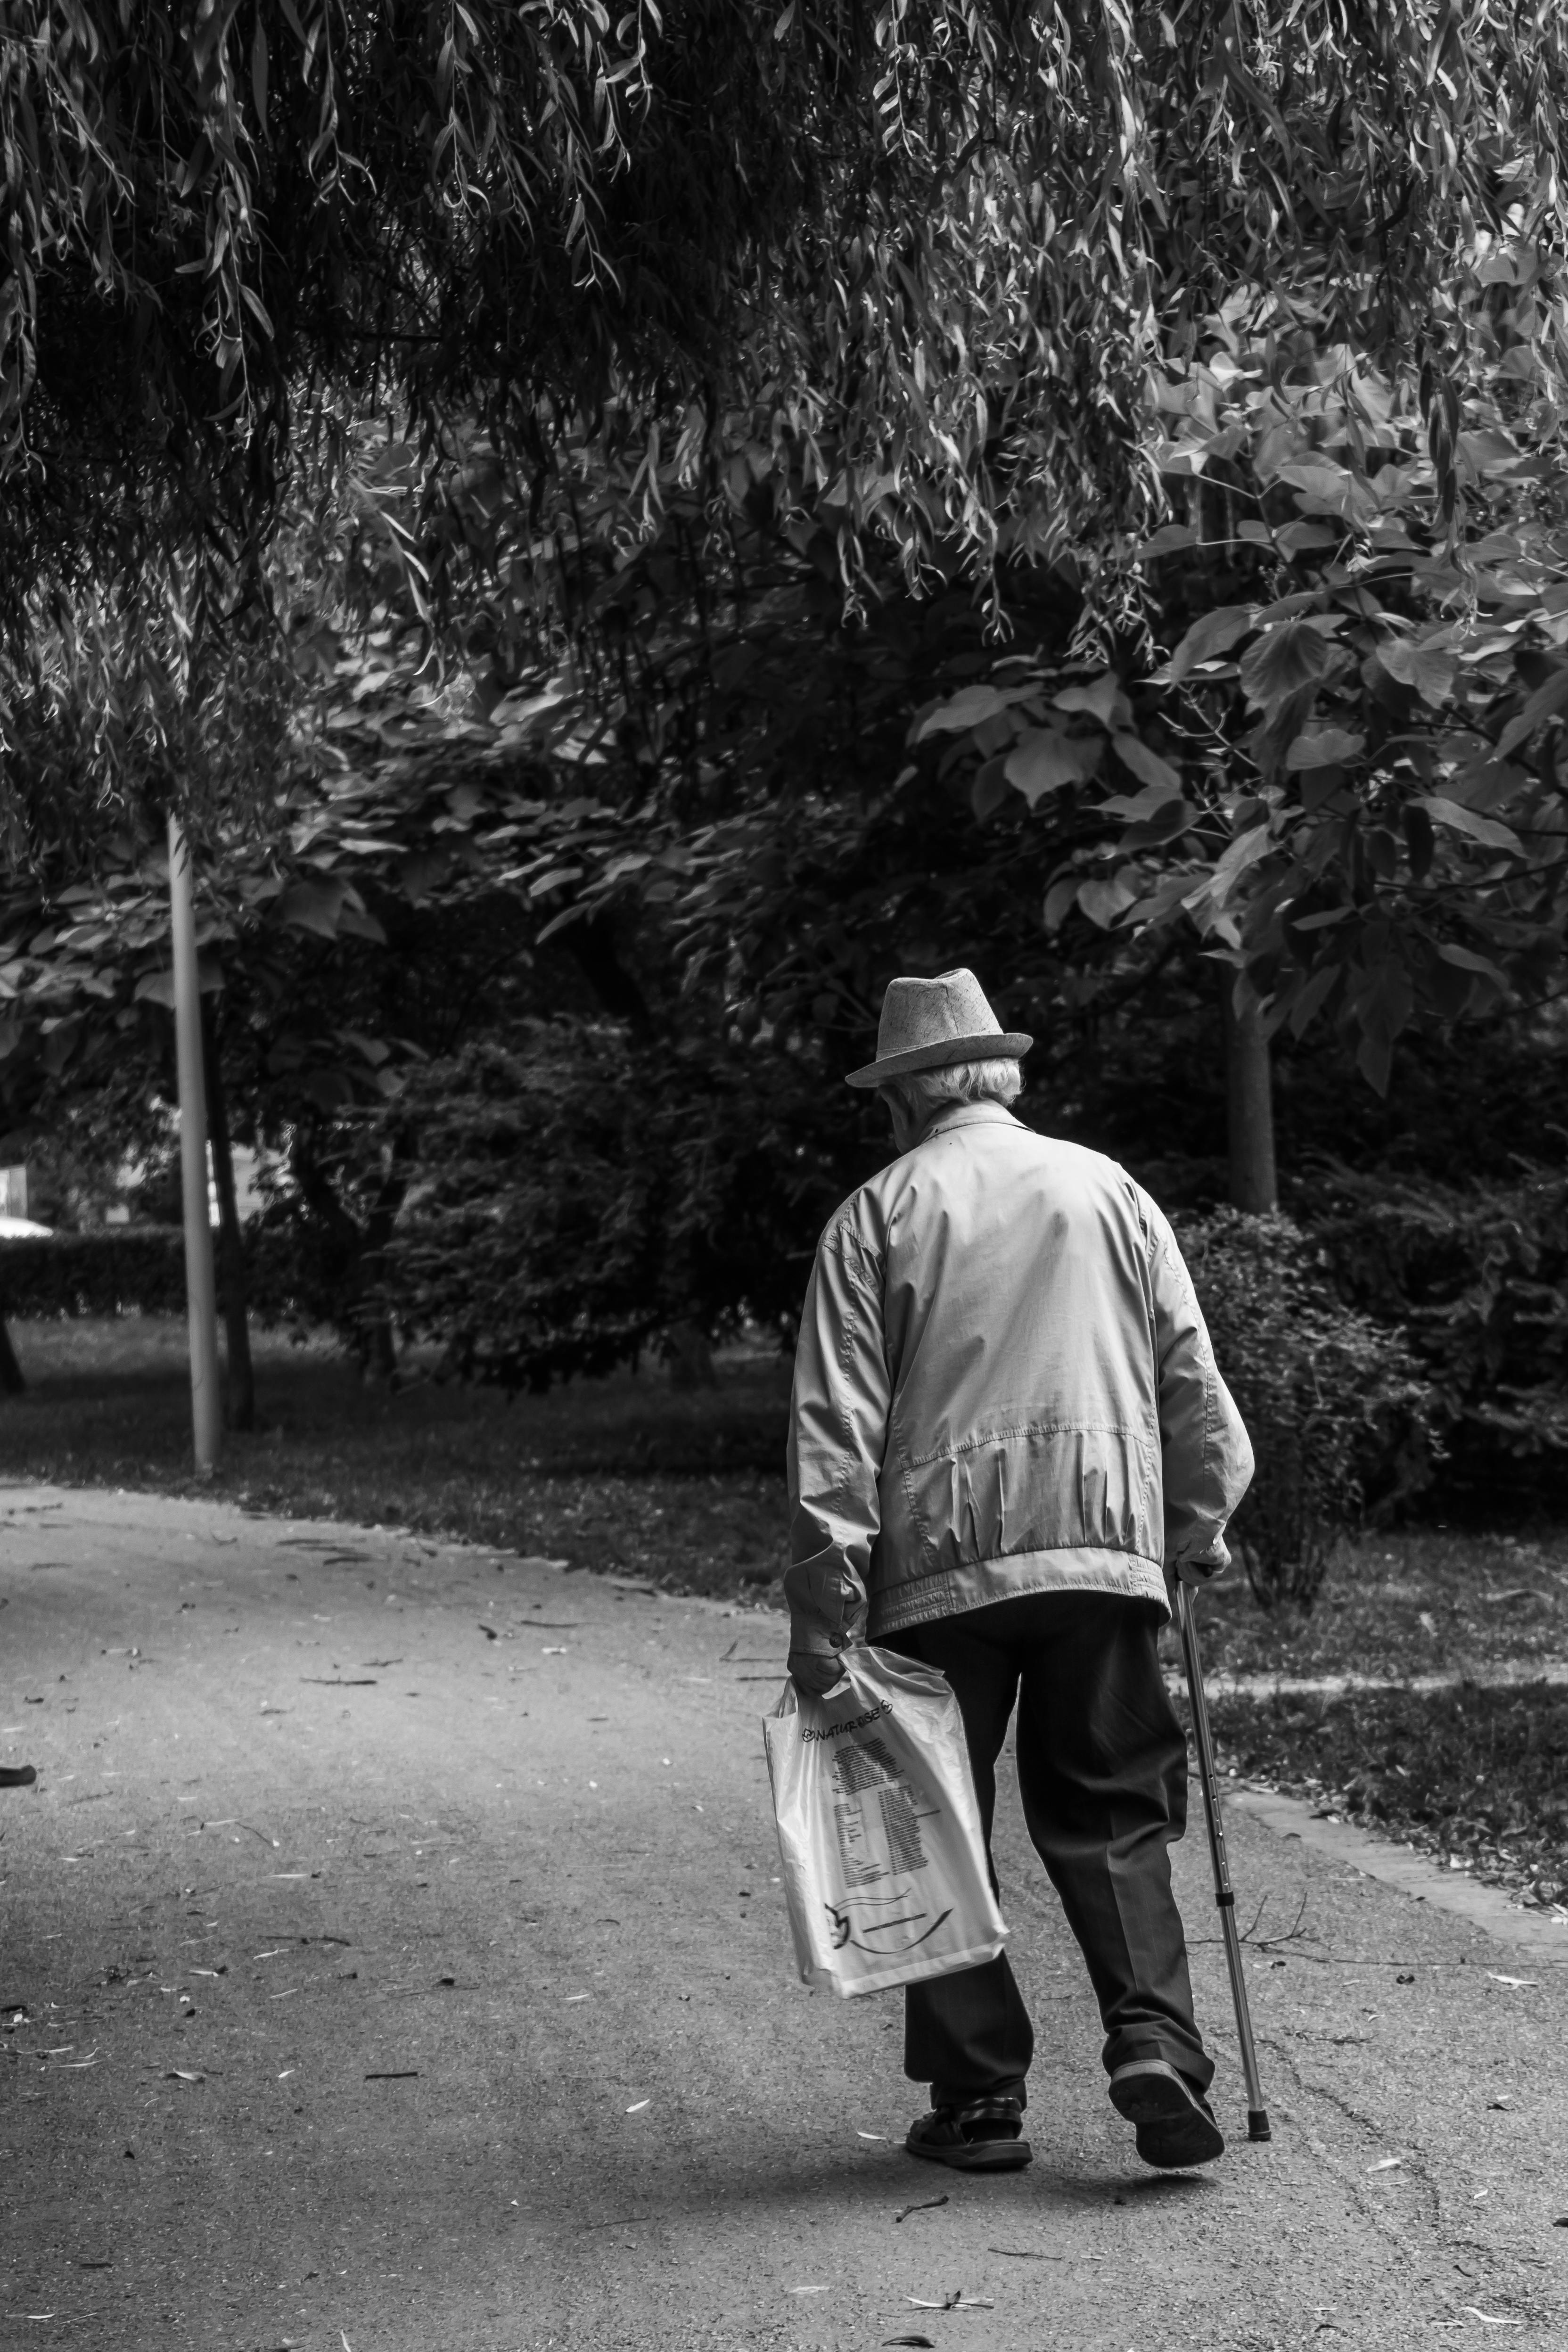 Grayscale of an old man walking with a cane and newspaper | Source: Pexels